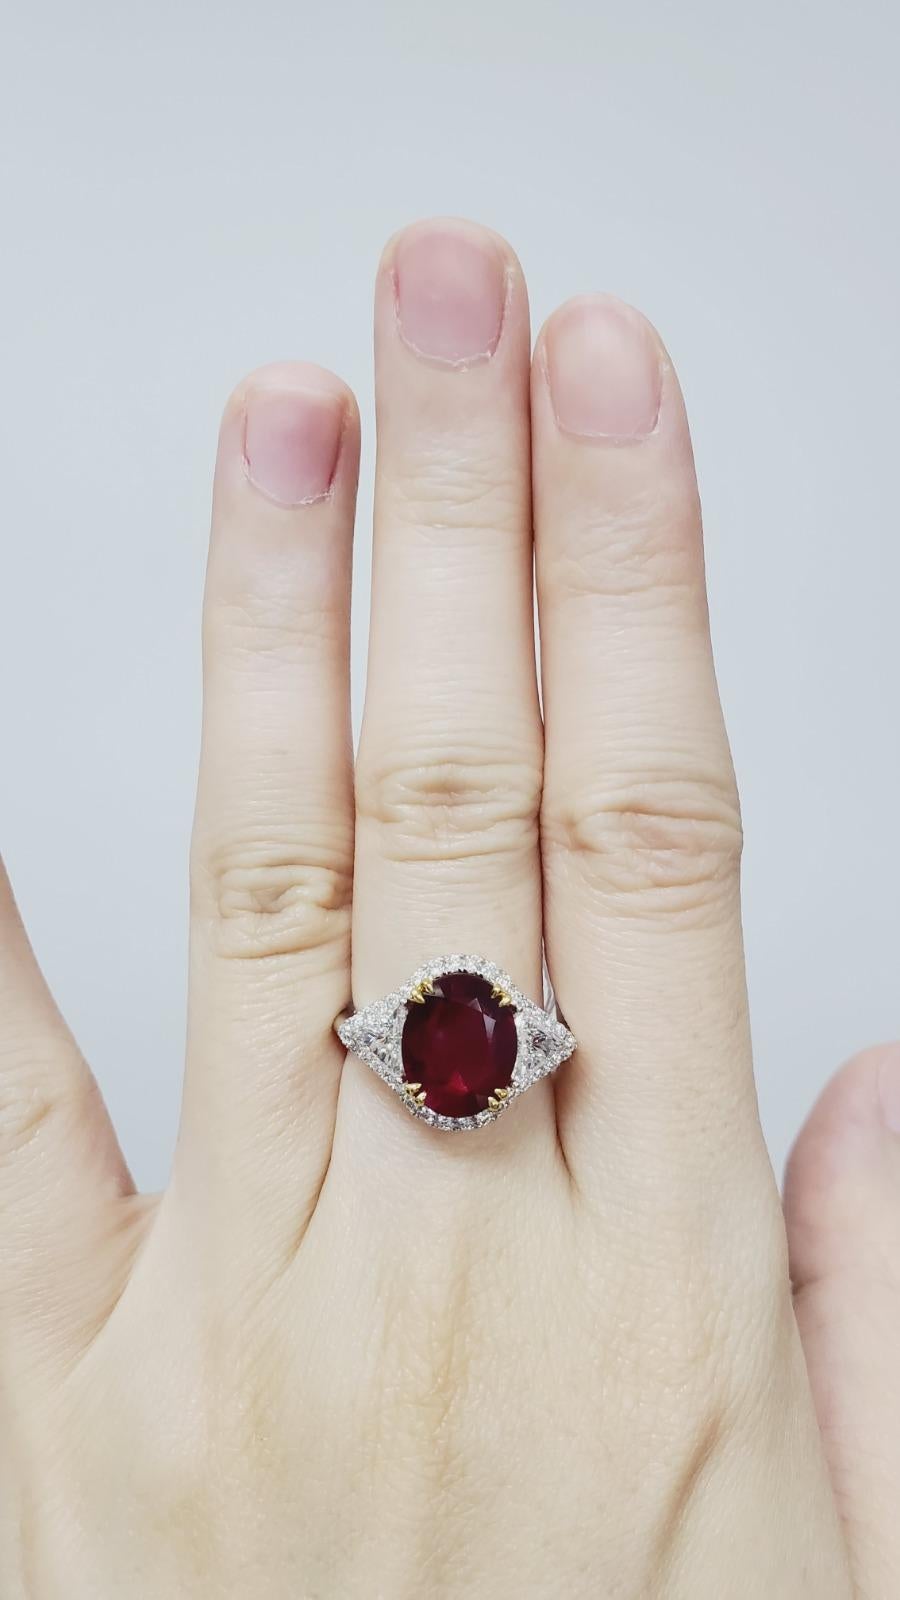 Set with an oval-shaped ruby, weighing 2.66 carats, flanked on either side by two triangular-shaped diamonds totaling 0.64 carats, surrounded by round brilliants totaling 0.31  carats and mounted in 18k white gold, ring size 6½.

Accompanied by